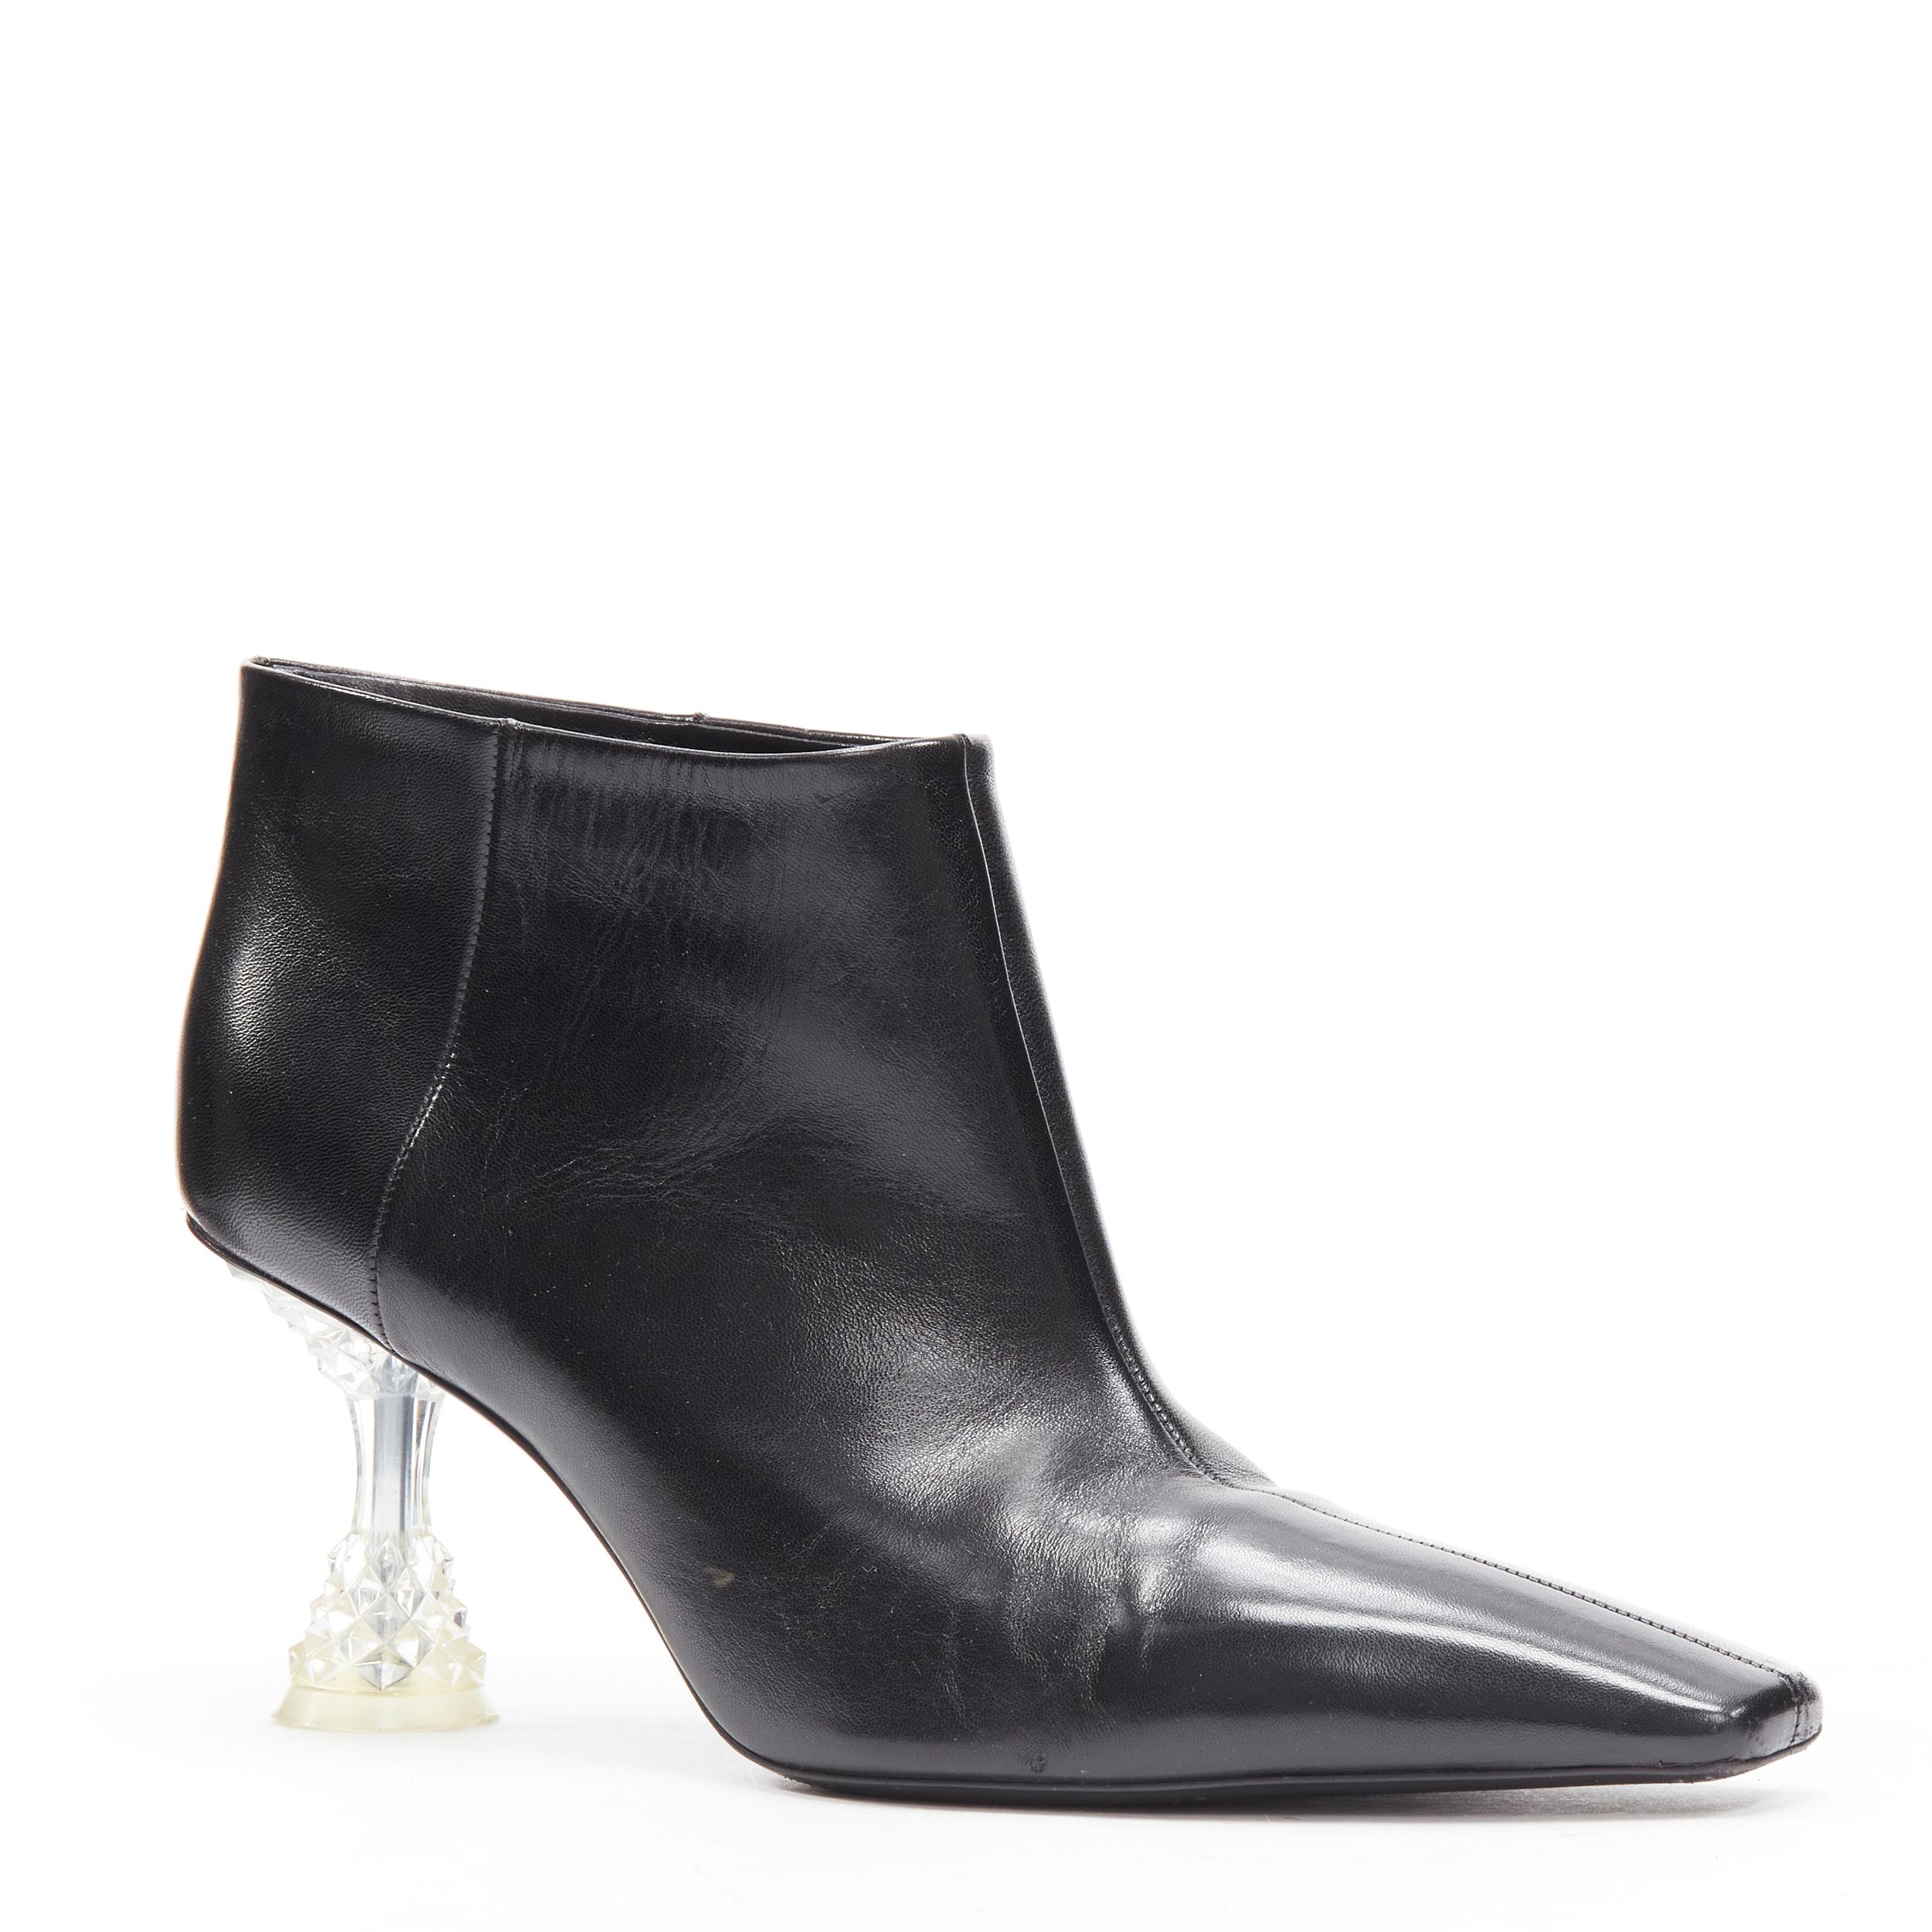 rare OLD CELINE Phoebe Philo 2018 clear crystal lucite heel black leather ankle boots EU38
Reference: LNKO/A02149
Brand: Celine
Designer: Phoebe Philo
Collection: Pre fall 2018 - Runway
Material: Leather, Plastic
Color: Black, Clear
Pattern: